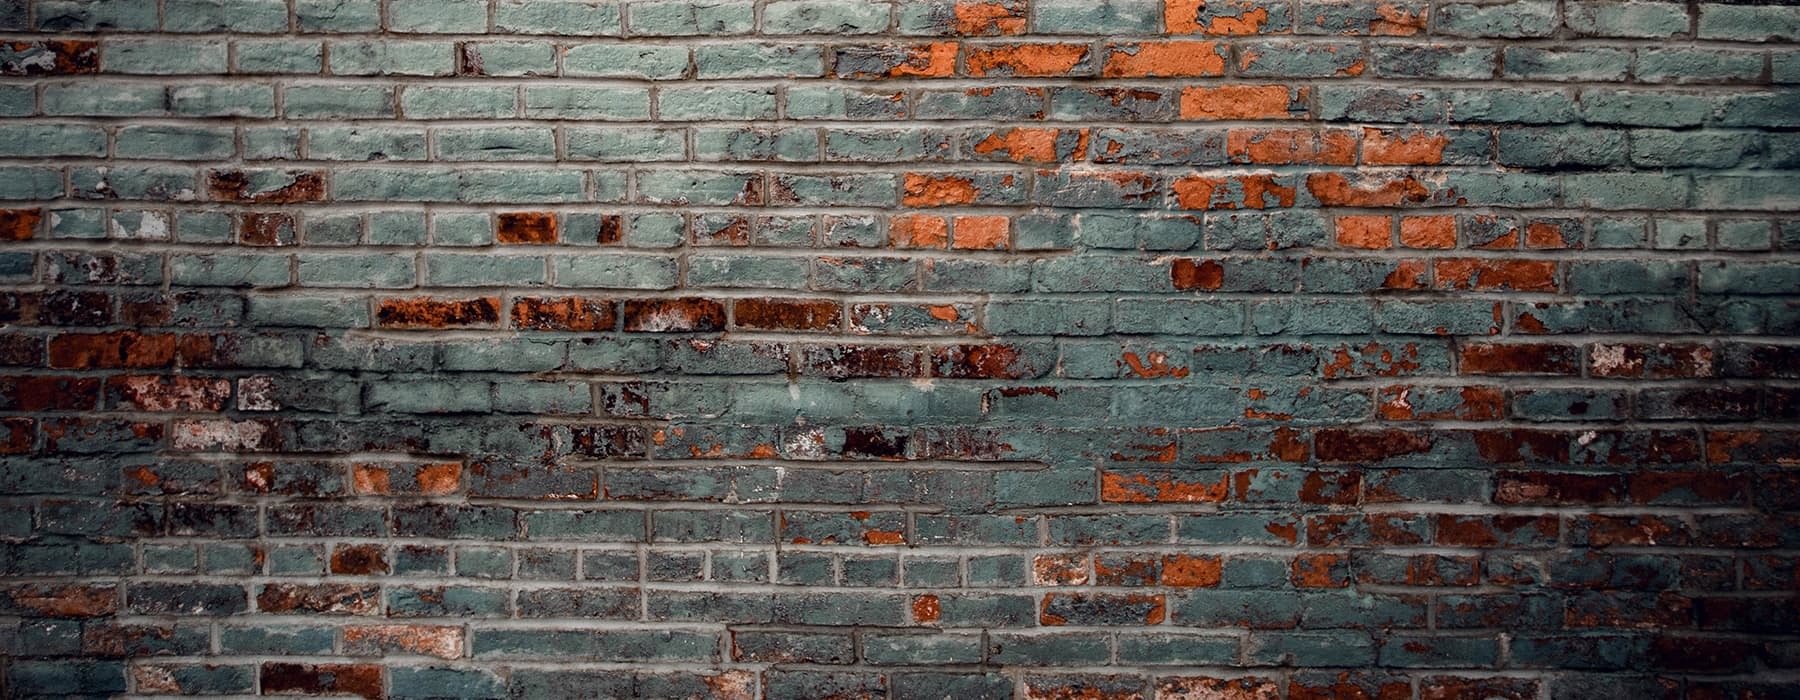 brick wall with some property accent colors